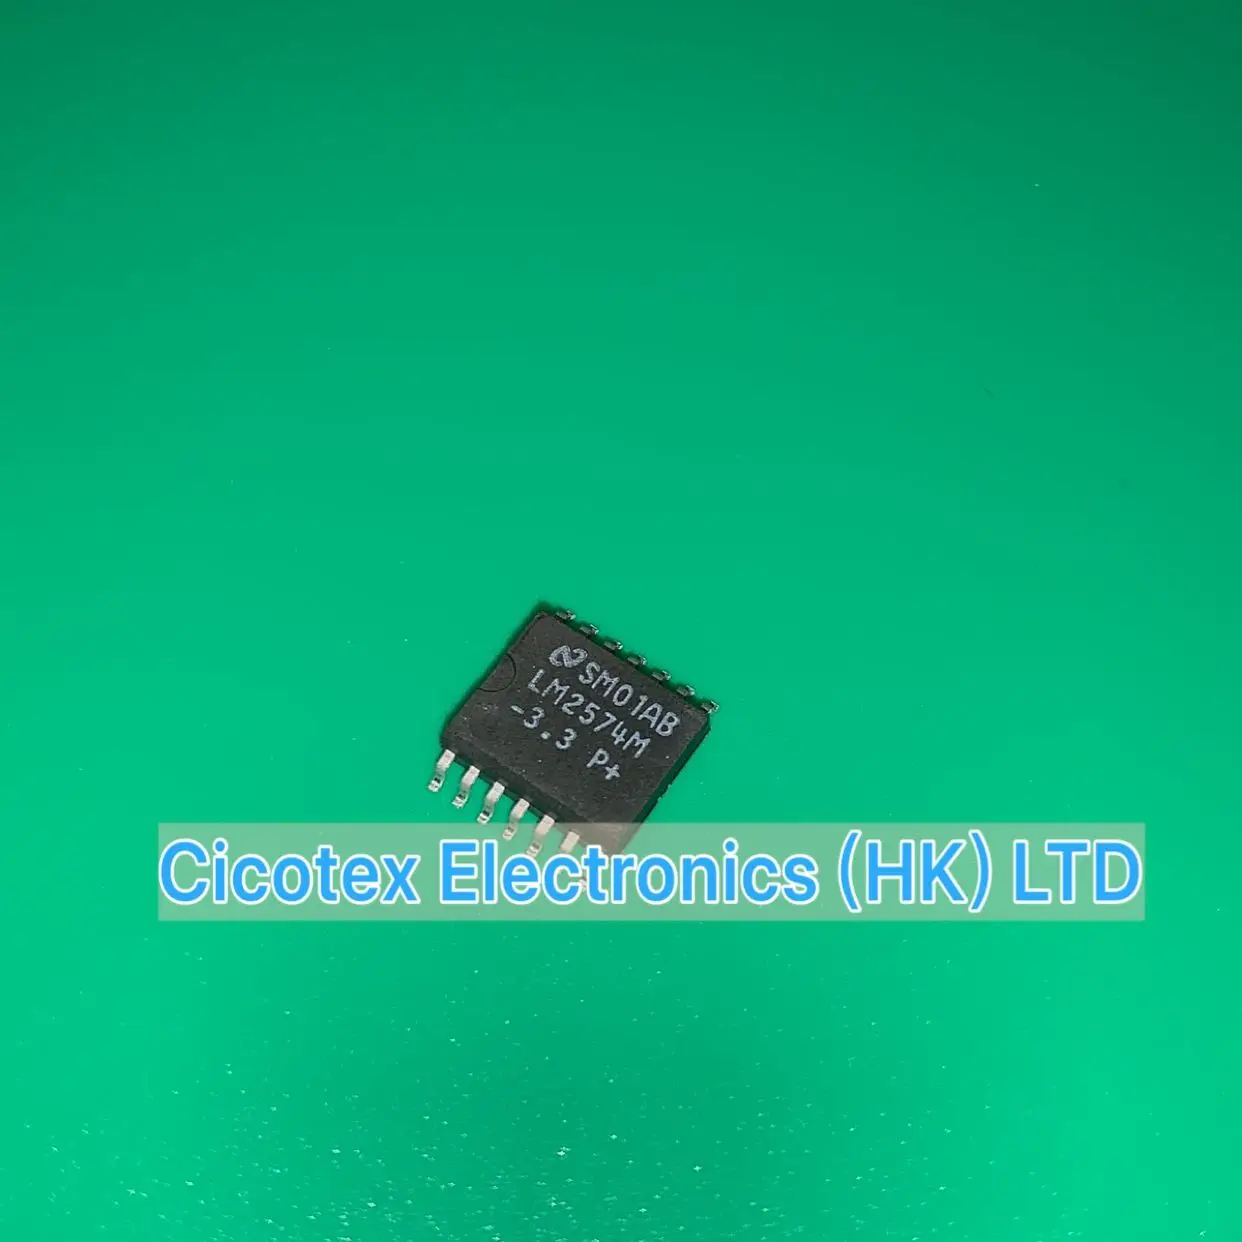 5pcs/lot LM2574MX-3.3 SOP14 LM2574M -3.3 P+ IC REG BUCK 3.3V 0.5A 14SOIC LM2574M-3.3 LM2574M-3.3P+ LM2574M33